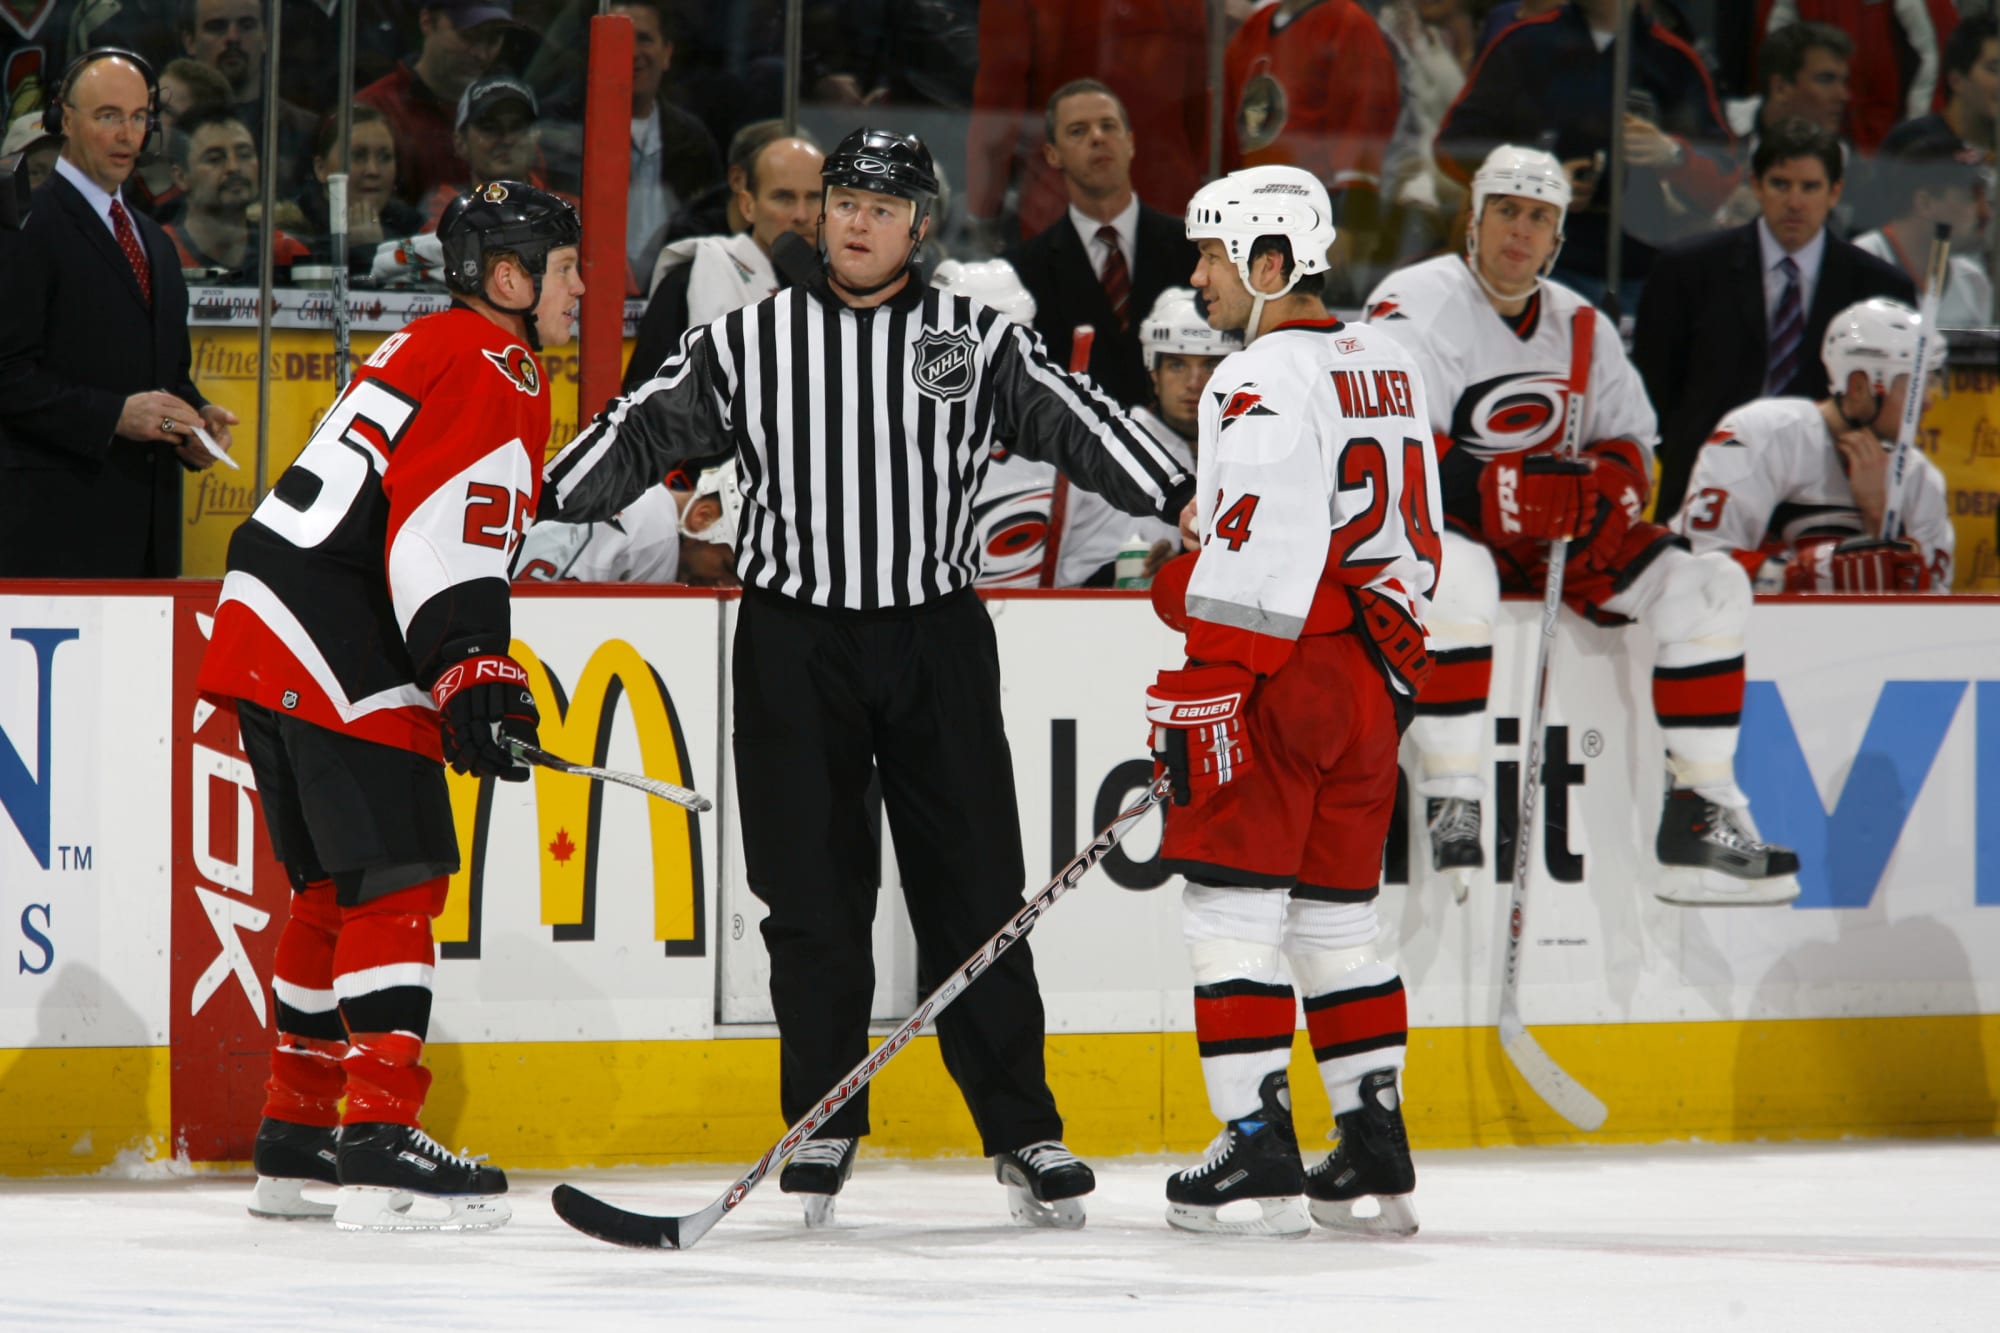 Carolina Hurricanes: 2006 Roster: Where Are They Now?